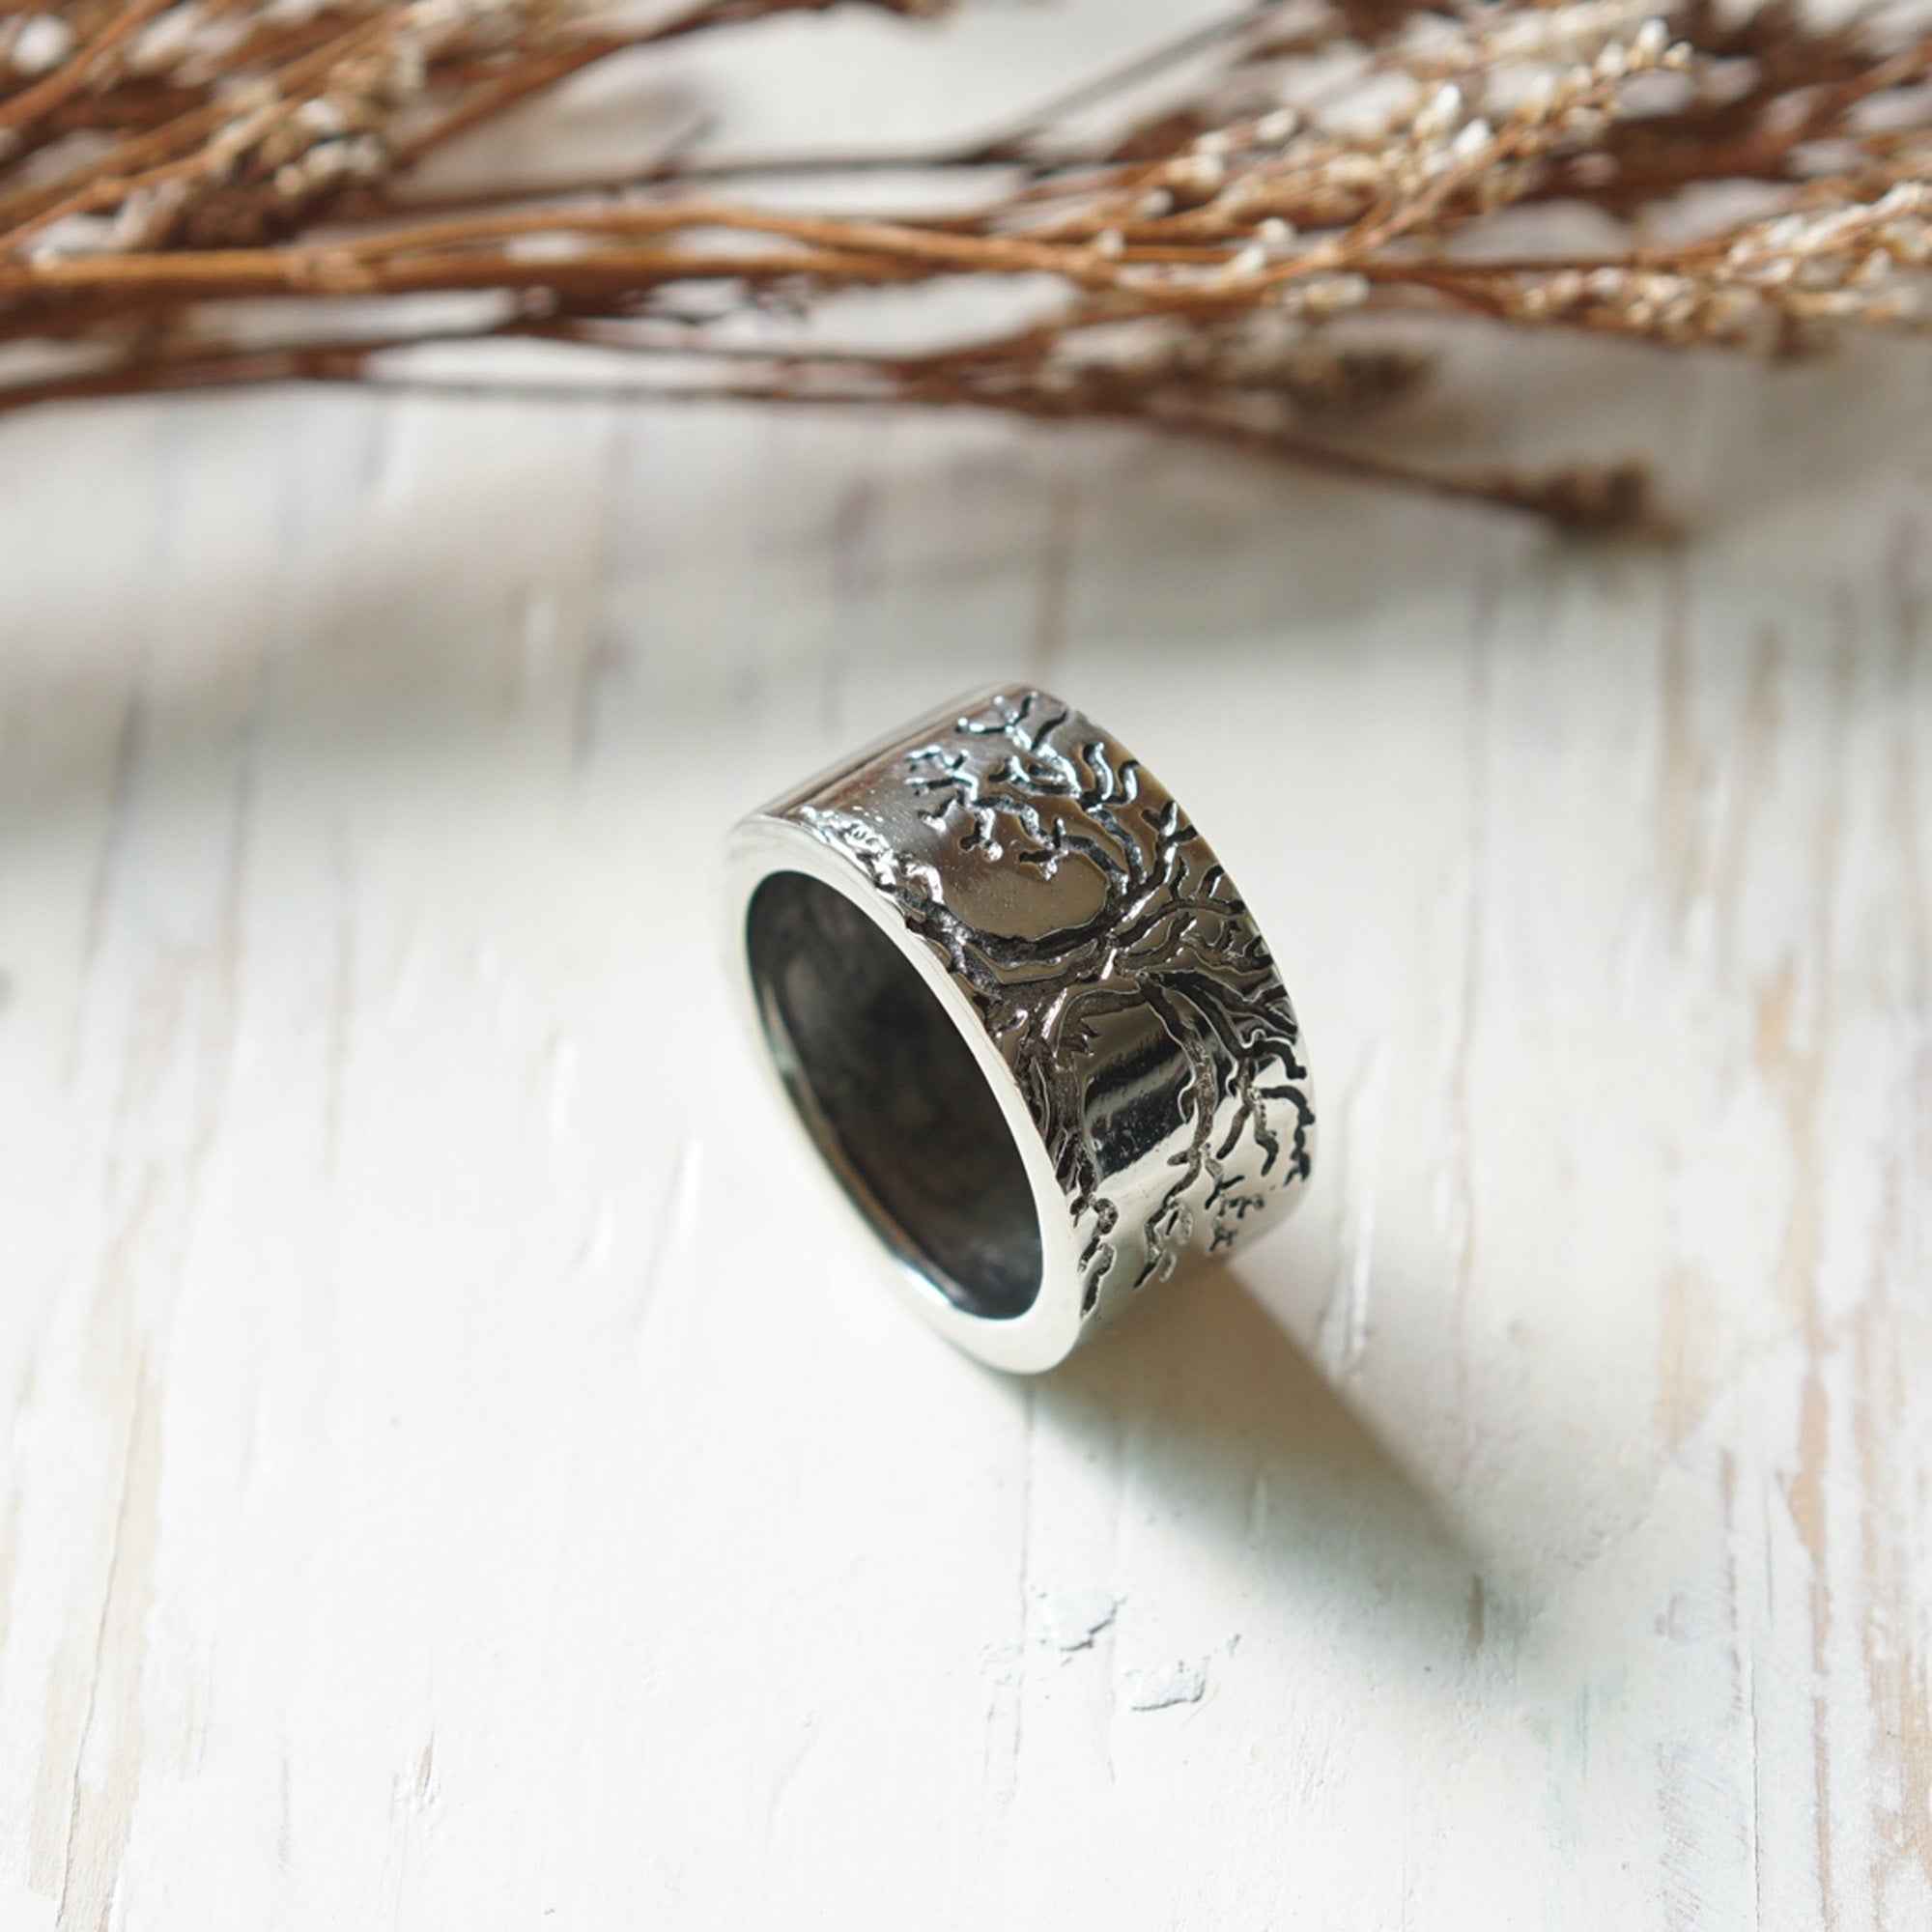 5 Easy Steps to Polish Your Sterling Silver Jewelry